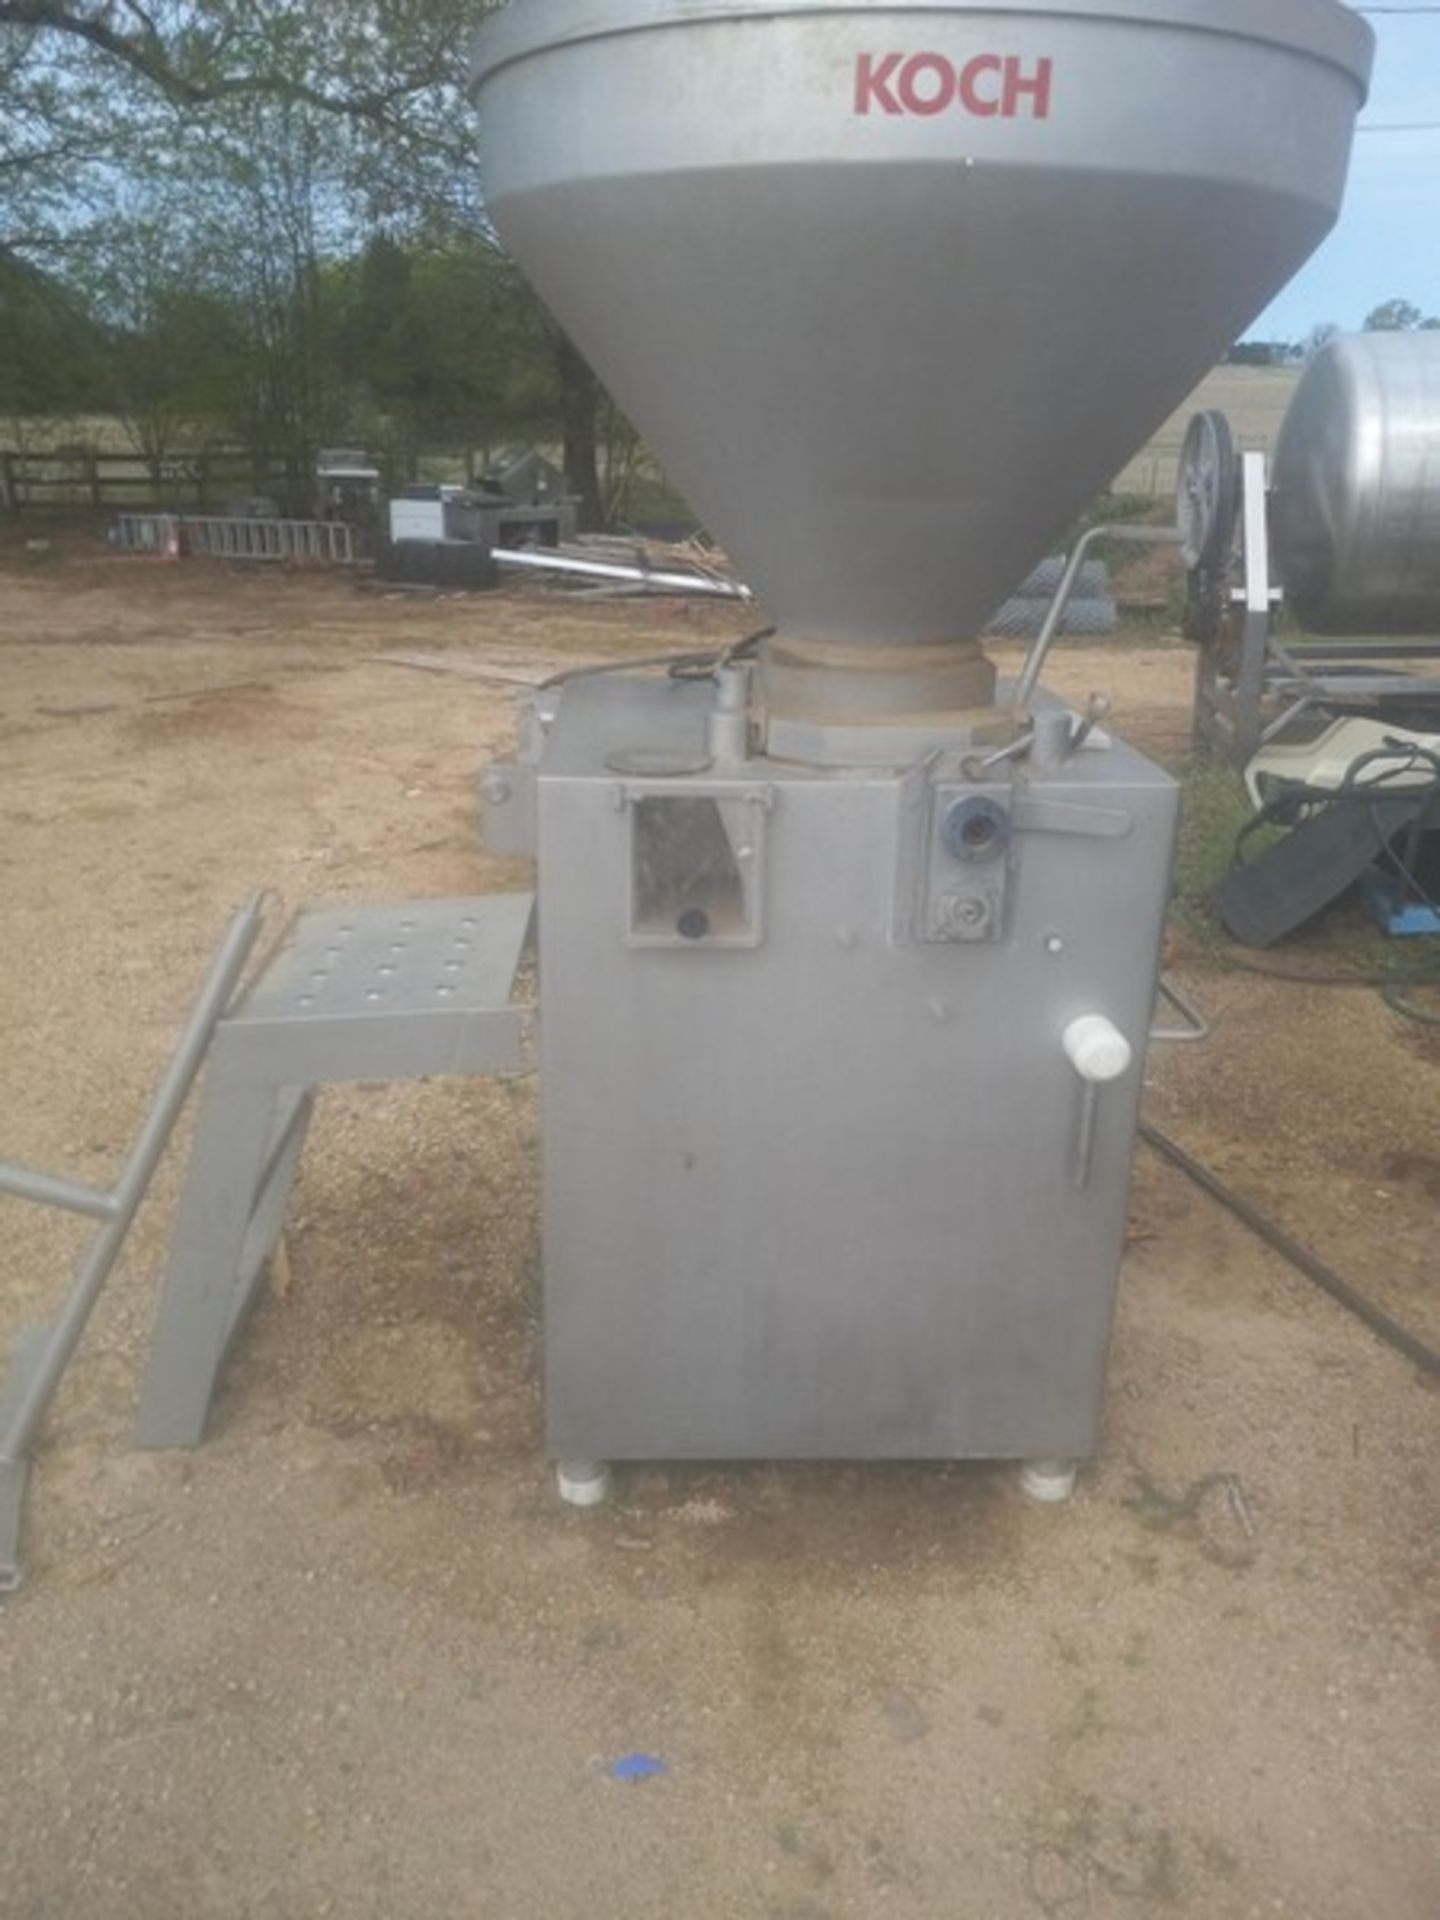 Koch Vacuum Stuffer, M/N C-75-1, S/N 232, 220 Volts, 3 Phase (LOCATED IN MOUNT VERNON, TX) (